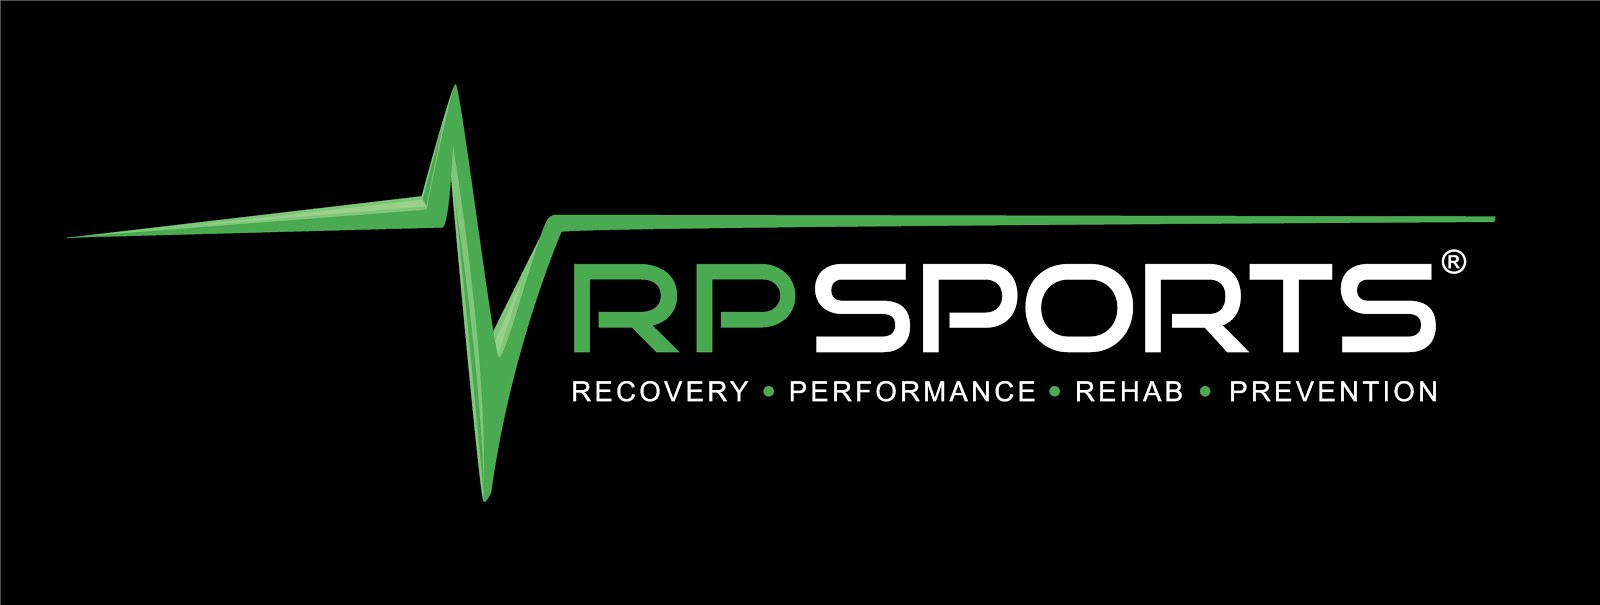 Recovery Performance Rehab Prevention